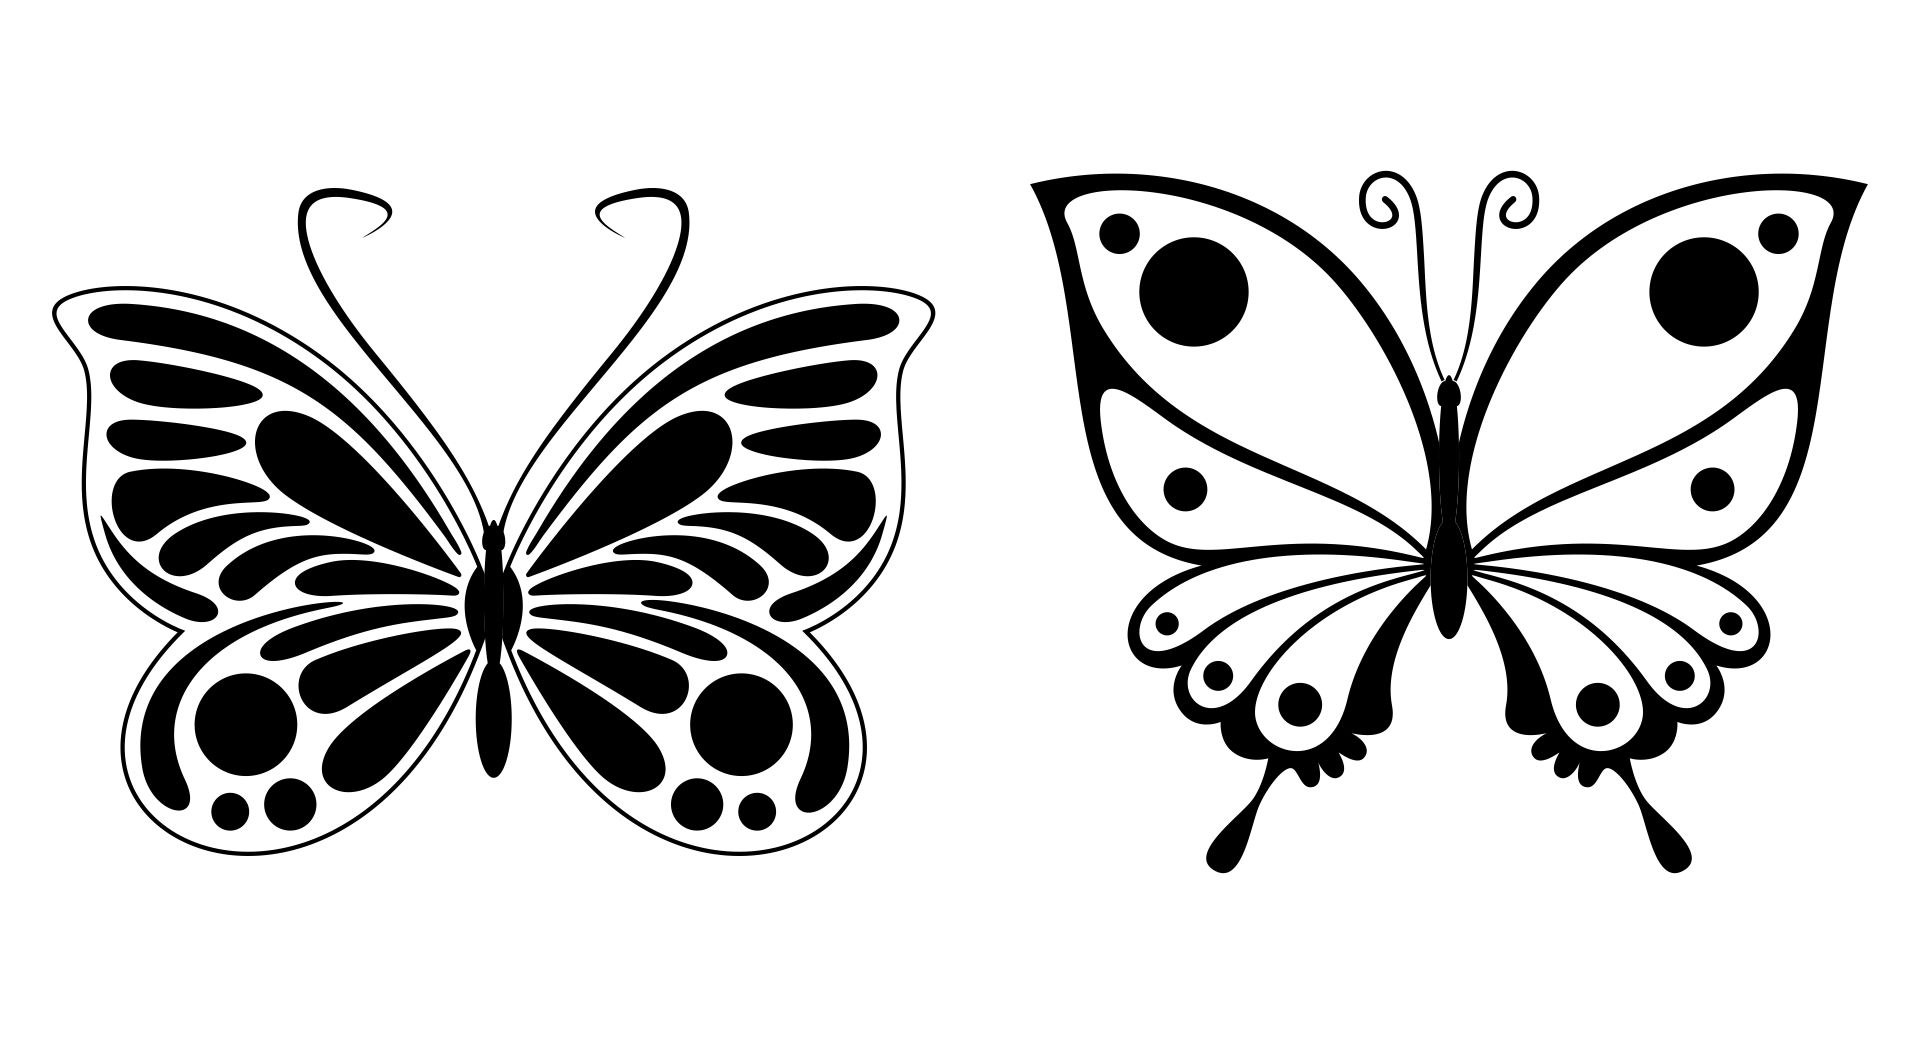 Printable Butterfly Stencil Patterns